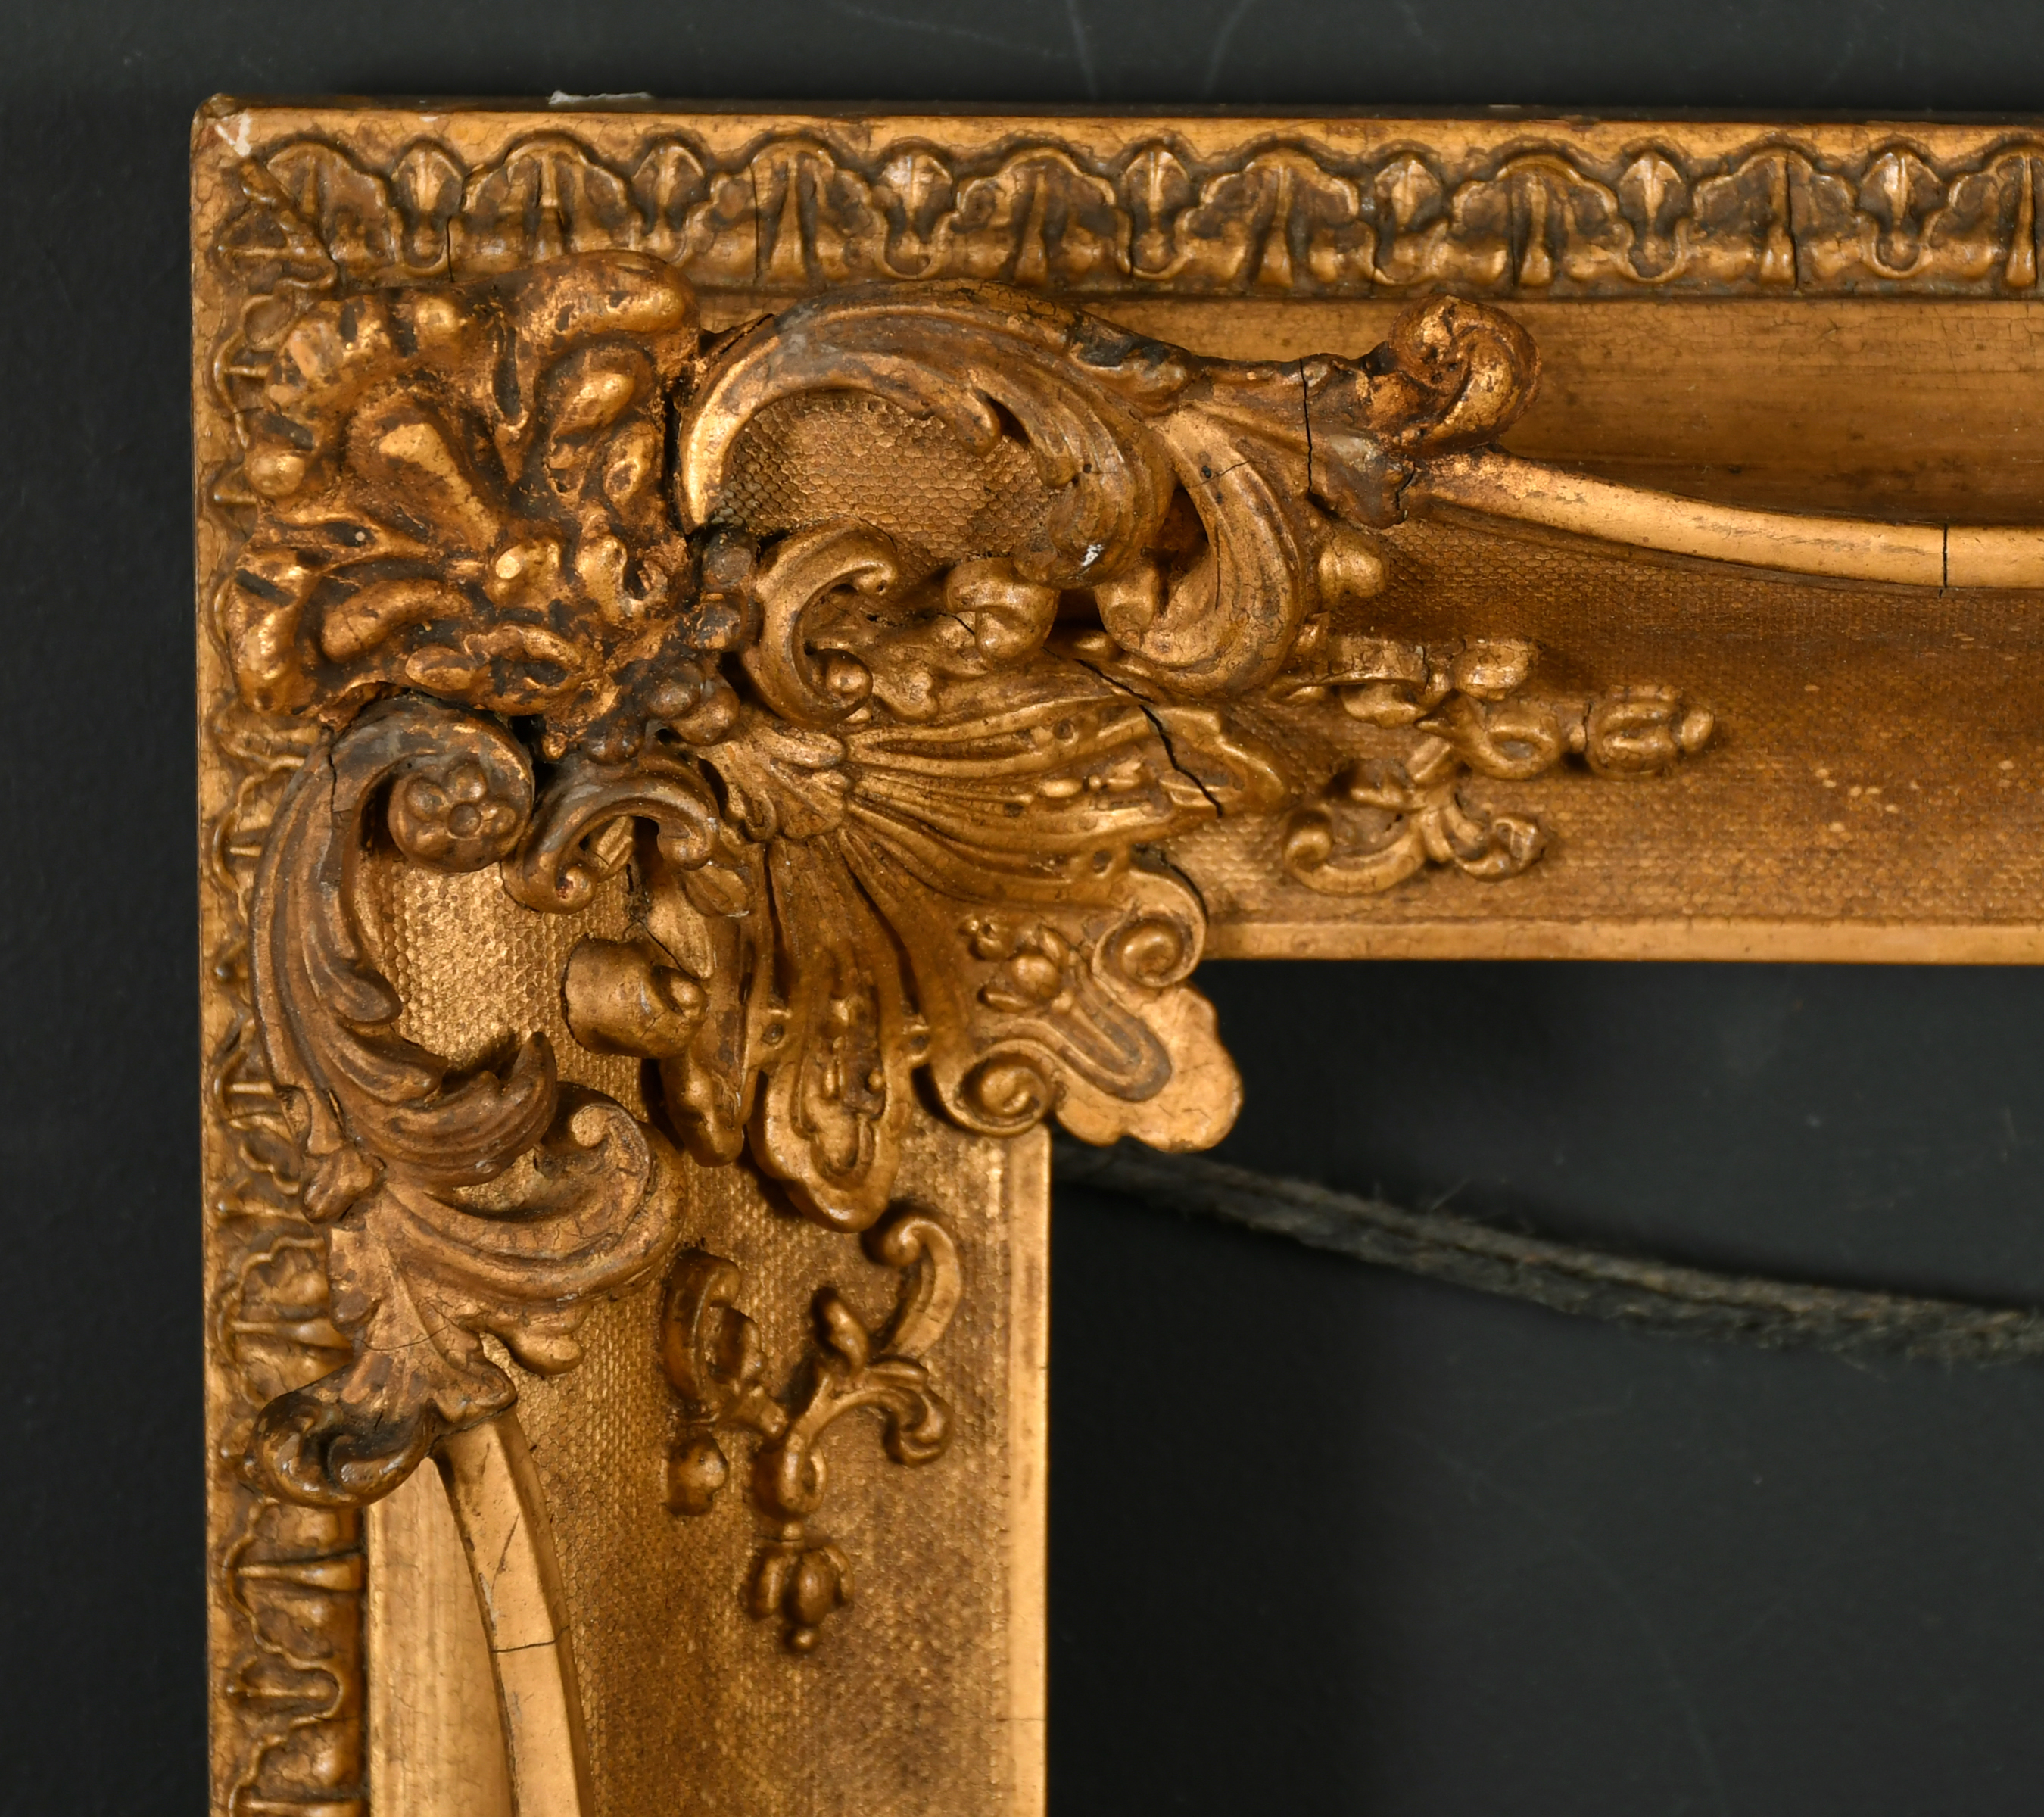 19th Century English School. A Gilt Composition Frame, with swept corners, rebate 7" x 6.25" (17.8 x